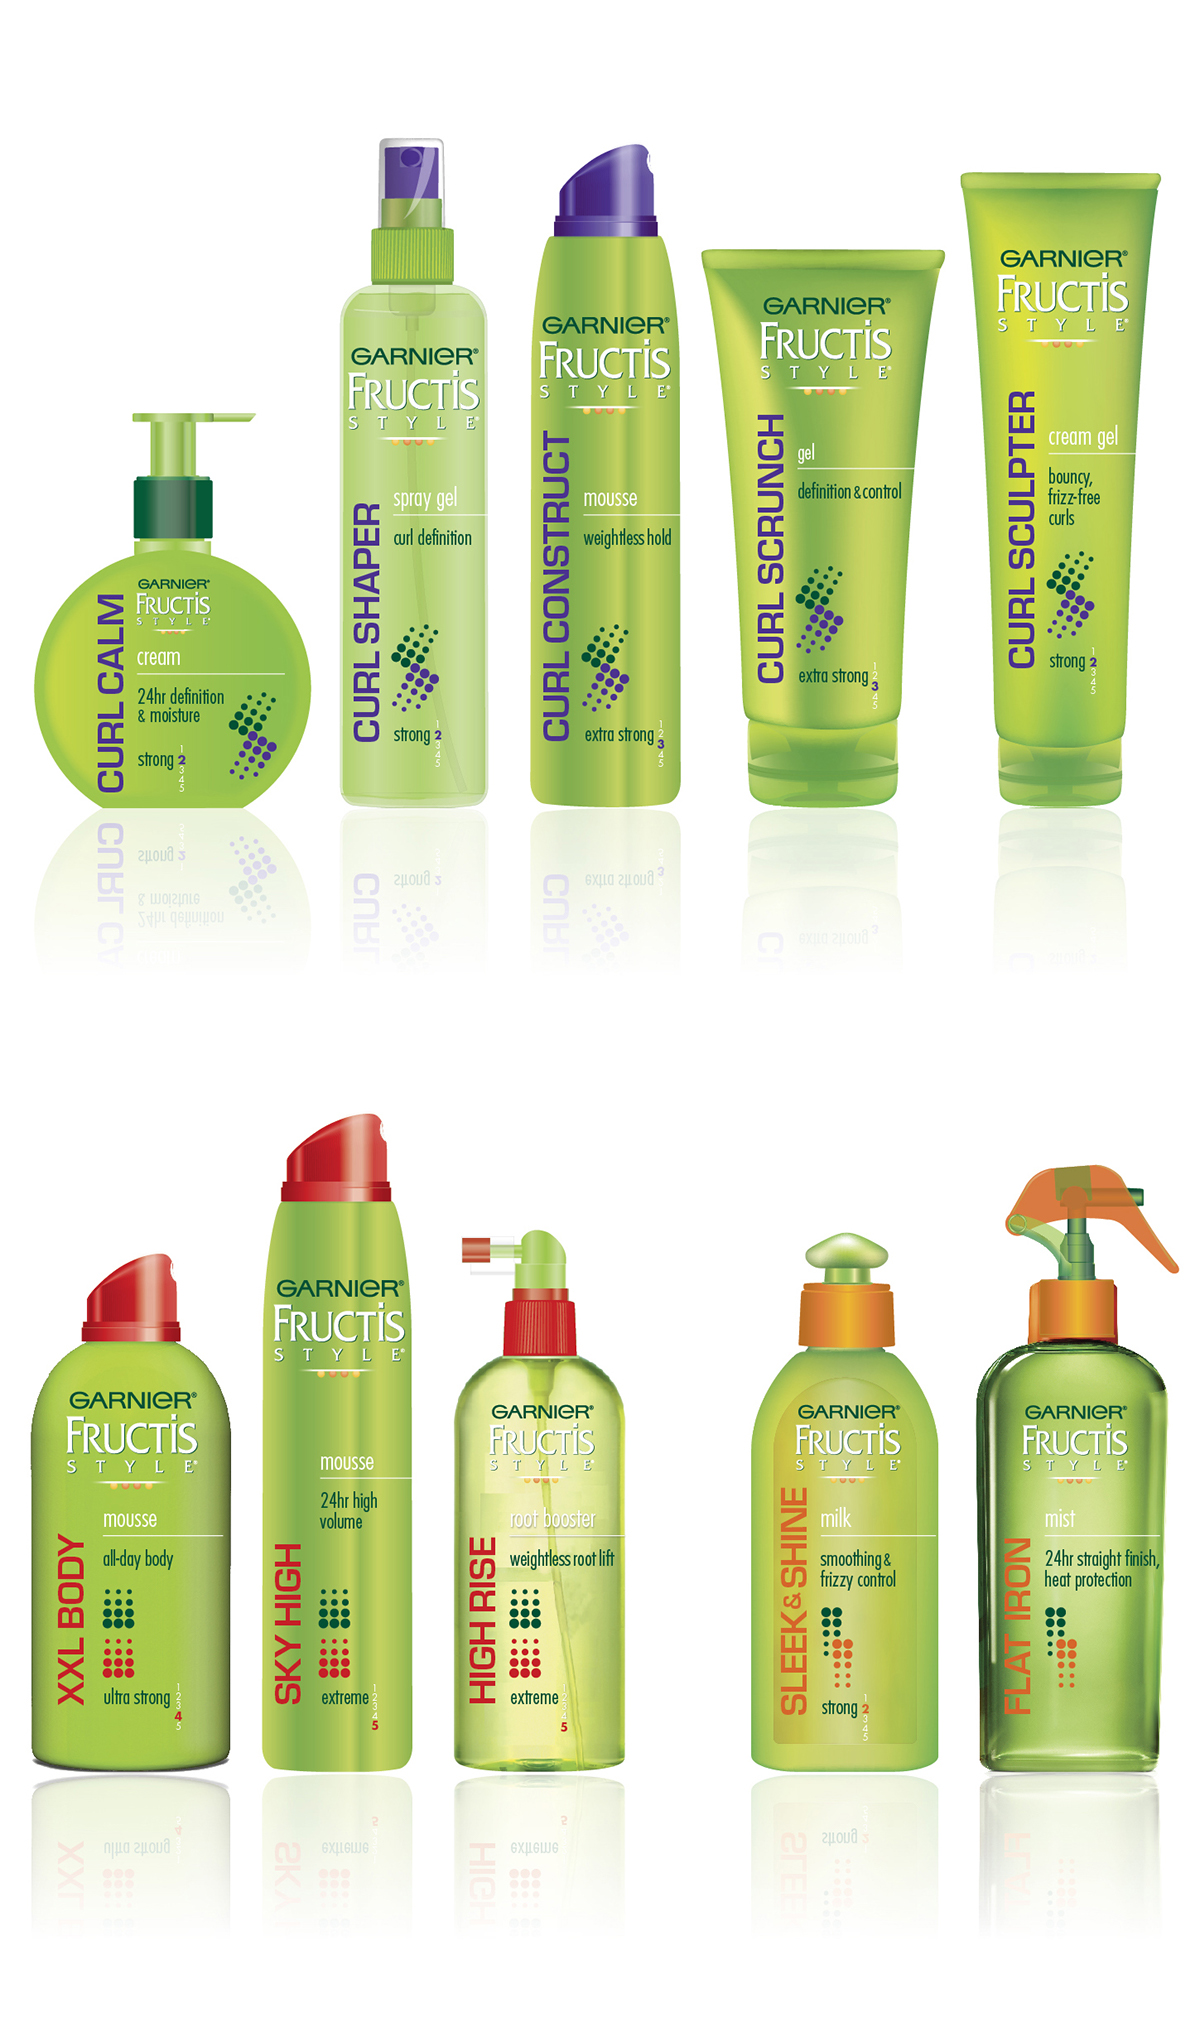 Garnier Fructis package design proposals for hair style and body